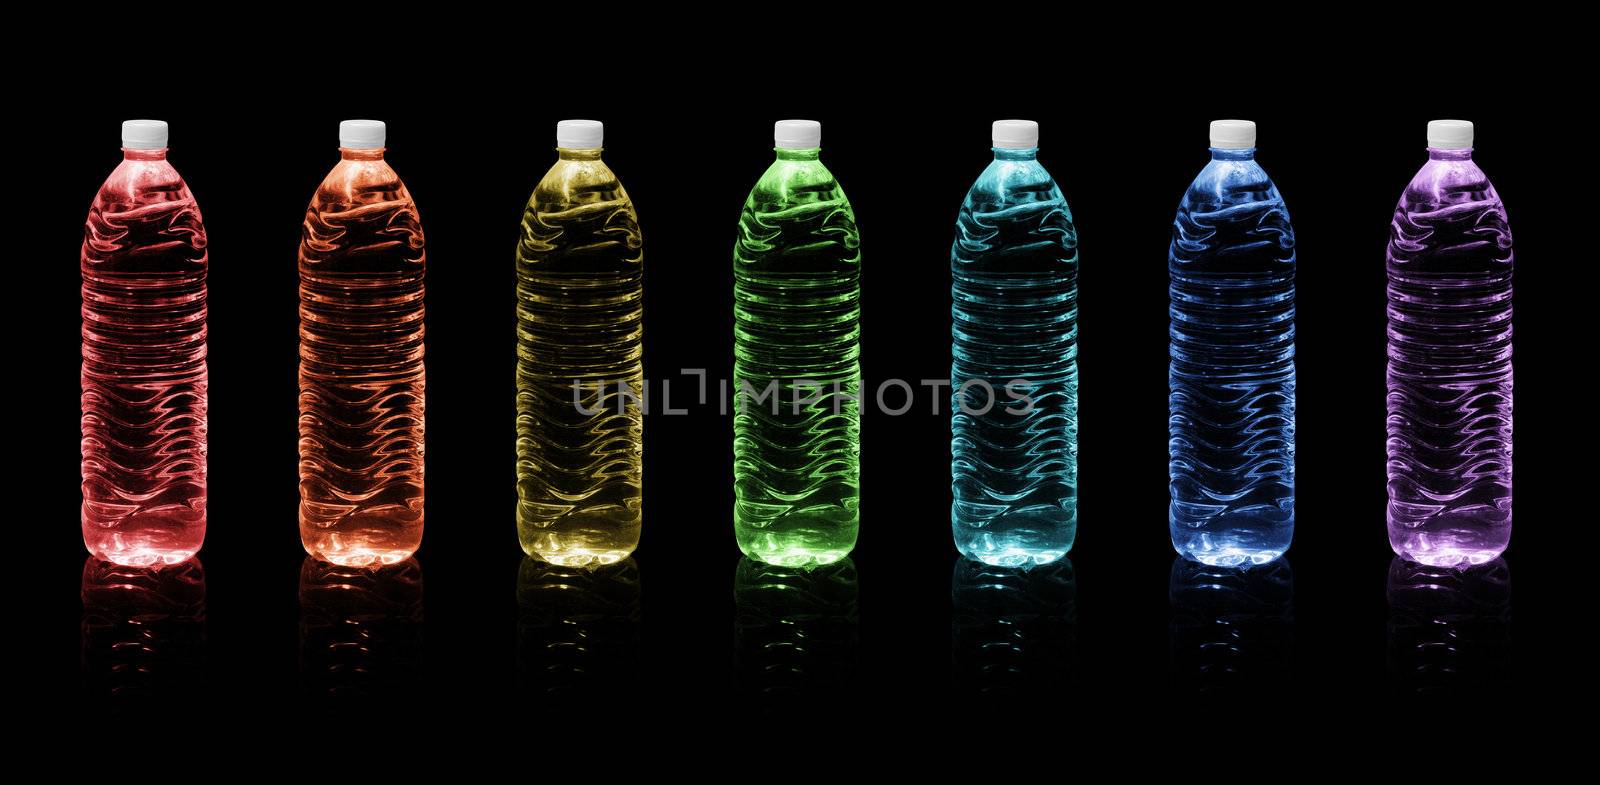 Seven bottles of drinking water colors of the rainbow on a black background